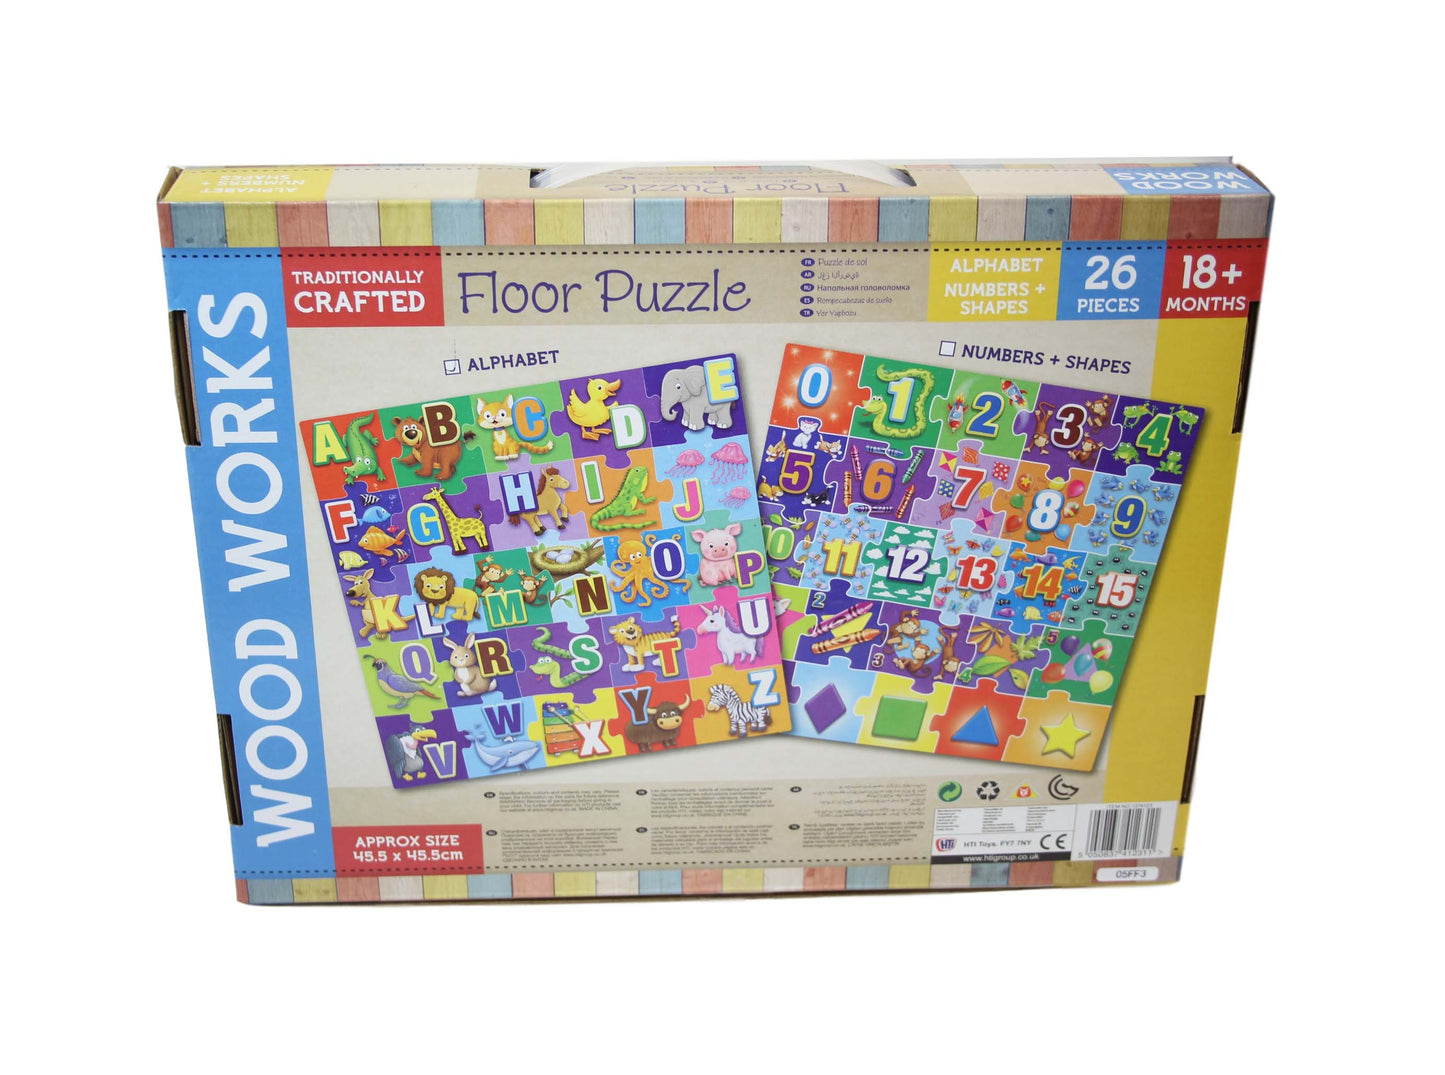 Alphabets and Letters Childrens Fun Puzzle Family Time Jigsaw Puzzle 45.5cm 1374123 (Parcel Rate)